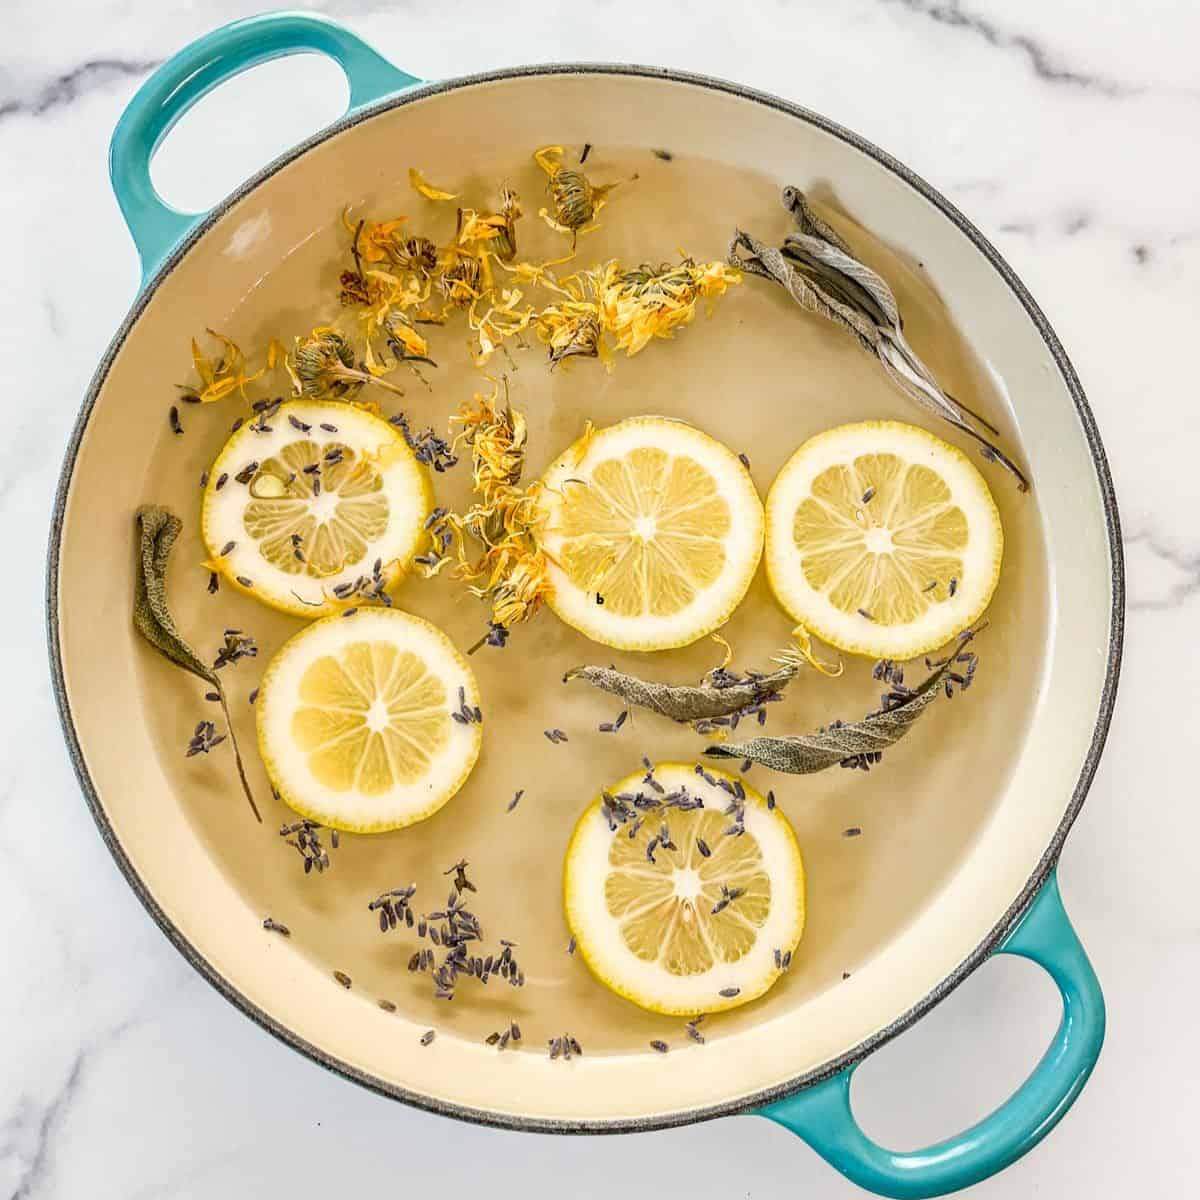 A spring simmer pot with lemons, dried flowers, and dried herbs in a teal skillet.